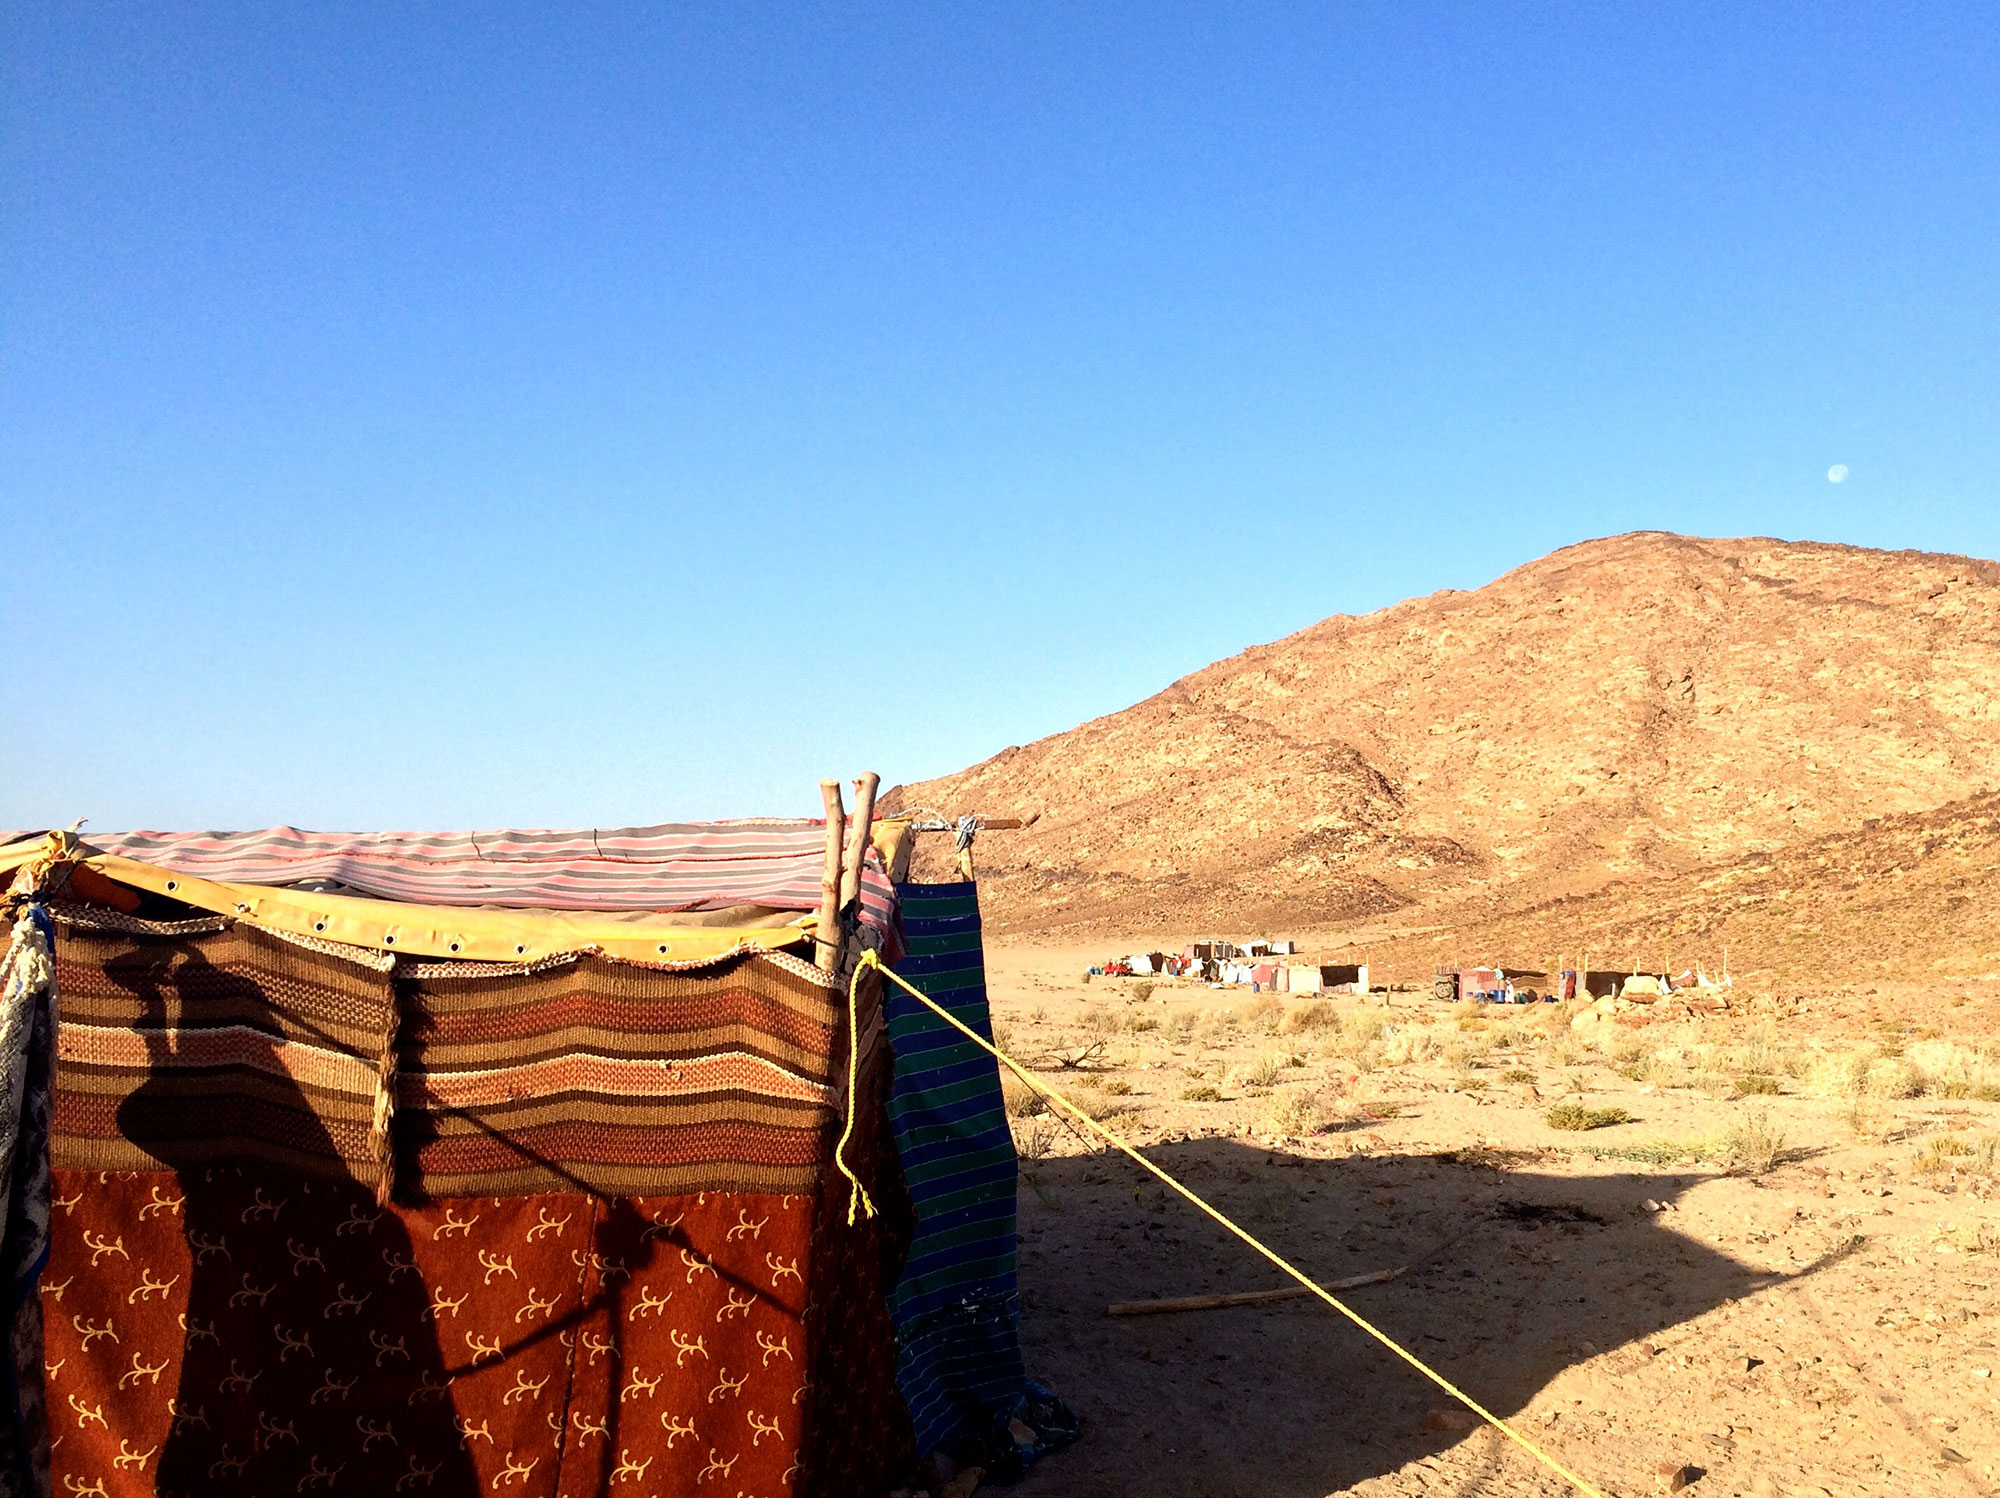 Find out about the Bedouin Life